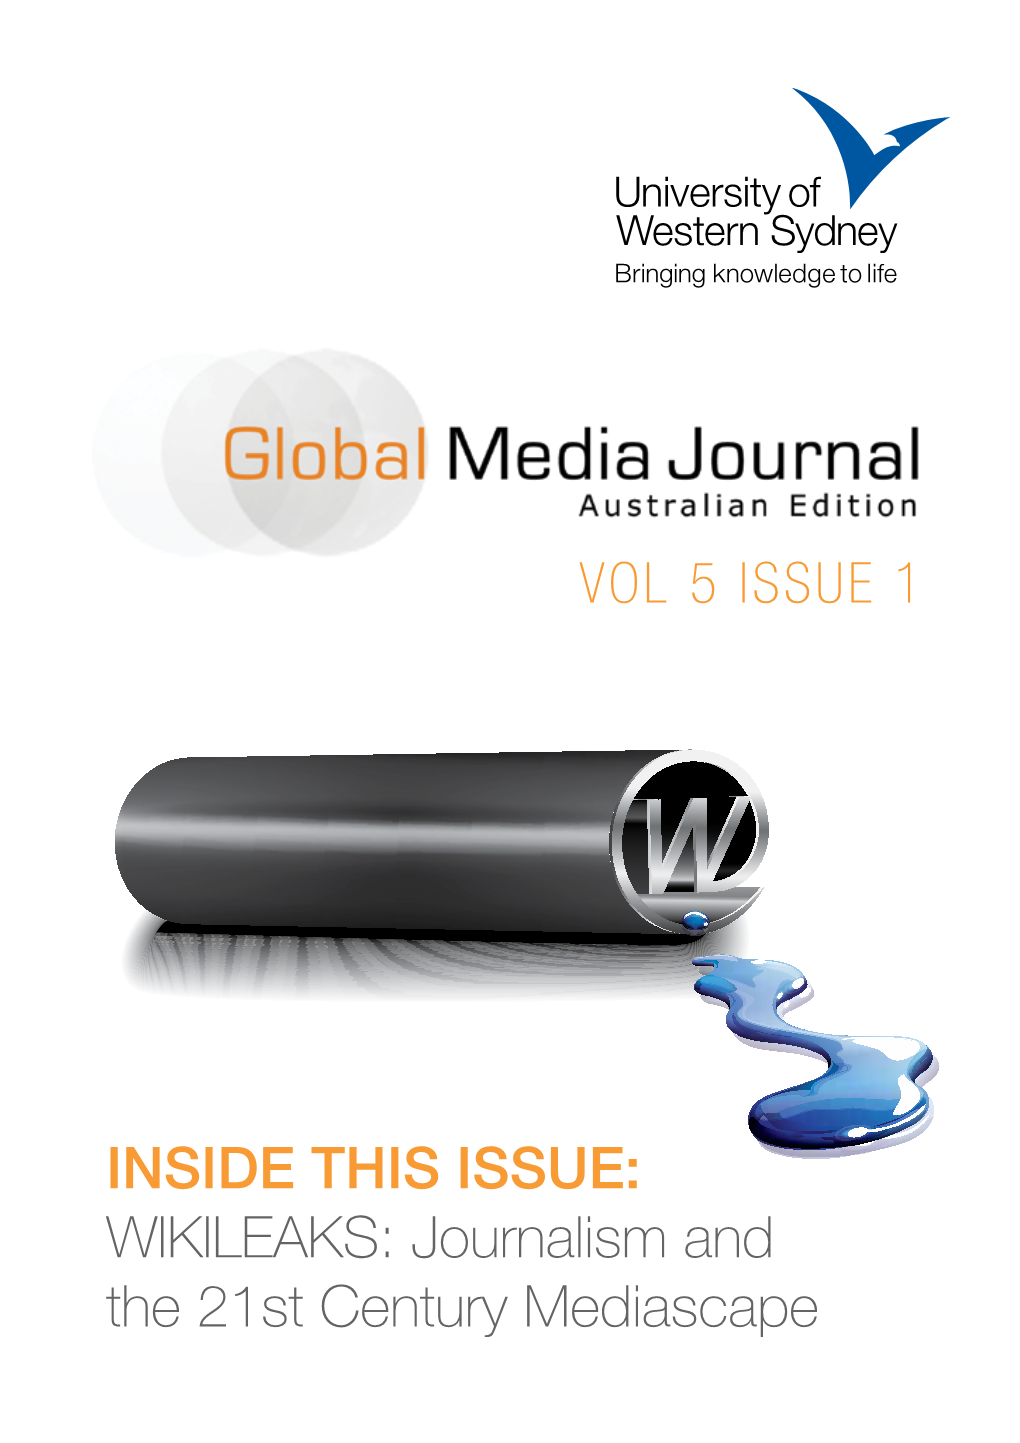 INSIDE THIS ISSUE: WIKILEAKS: Journalism and the 21St Century Mediascape 2 Global Media Journal Contentsaustralian Edition Vol 5.1